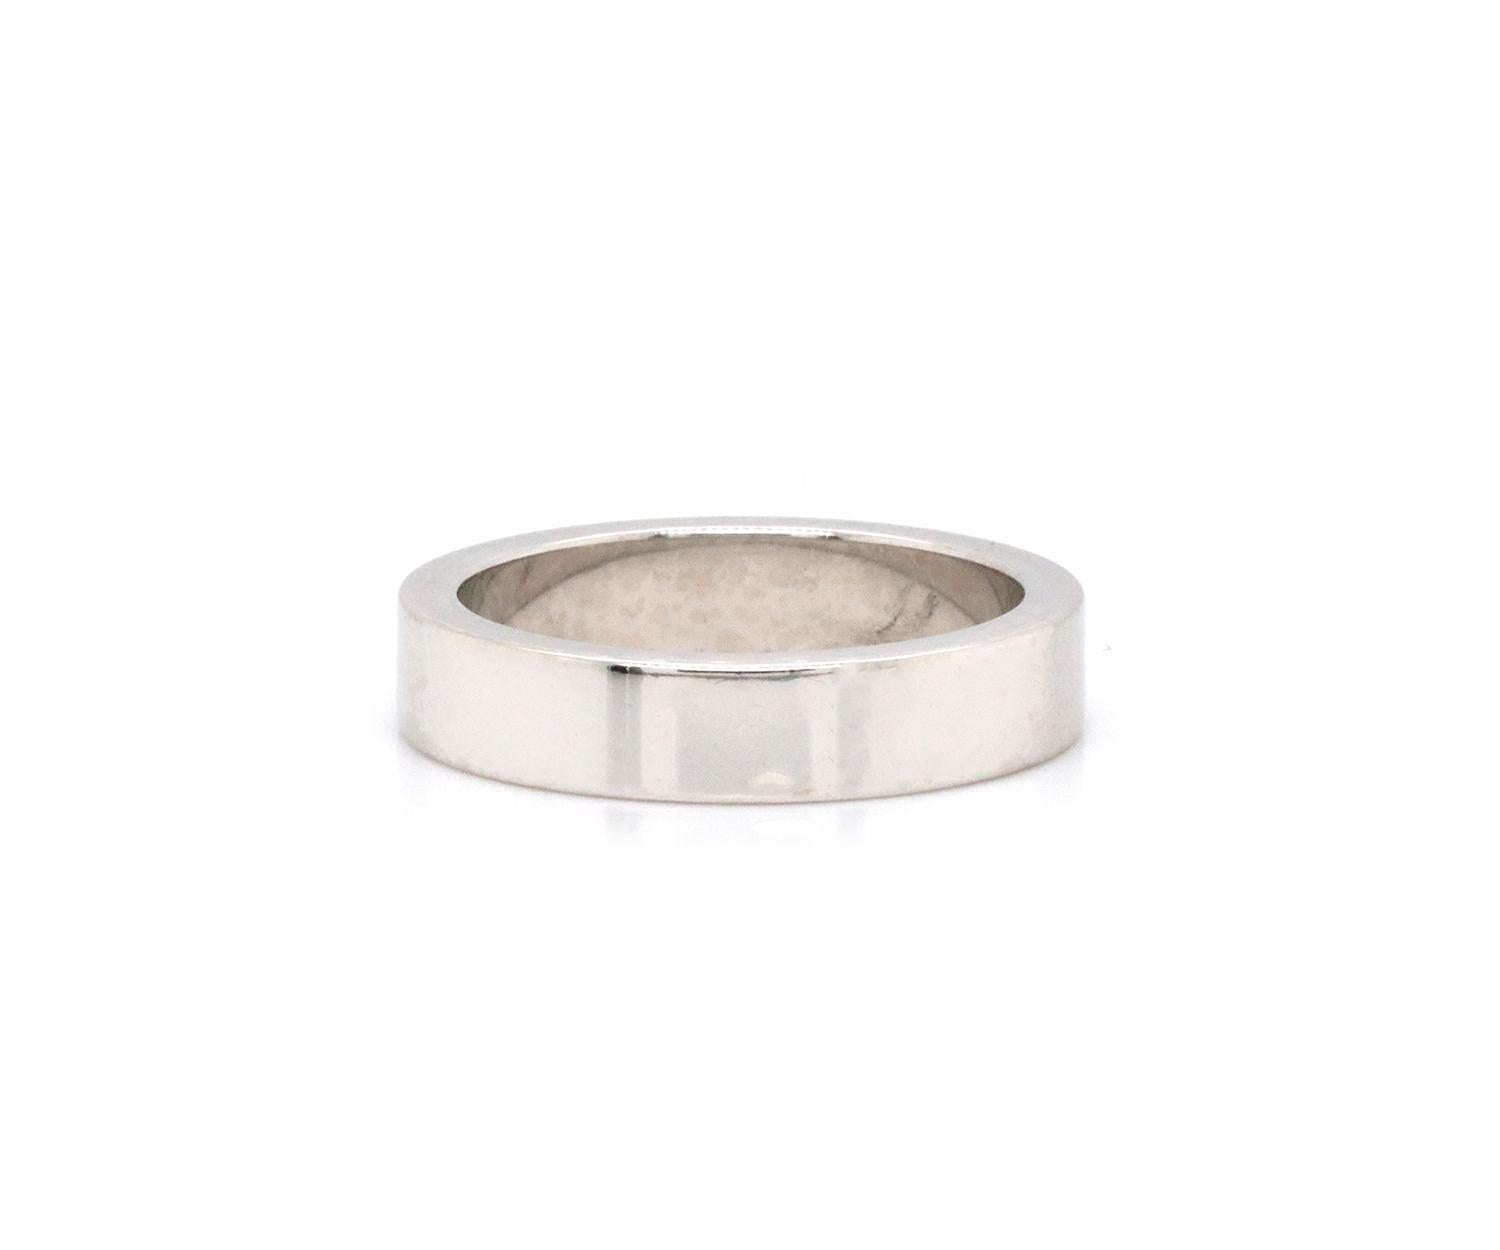 Bvlgari Marry Me Flat Edge Band, Platinum

Bvlgari
Marry Me Band
Platinum
Ring Size, 6.25 (US)
Total Weight, 9.60 grams
Signed, Bvlgari
Stamped, 950
Stamped, Made in Italy
Condition:

Offered for your consideration is a previously owned ring made by